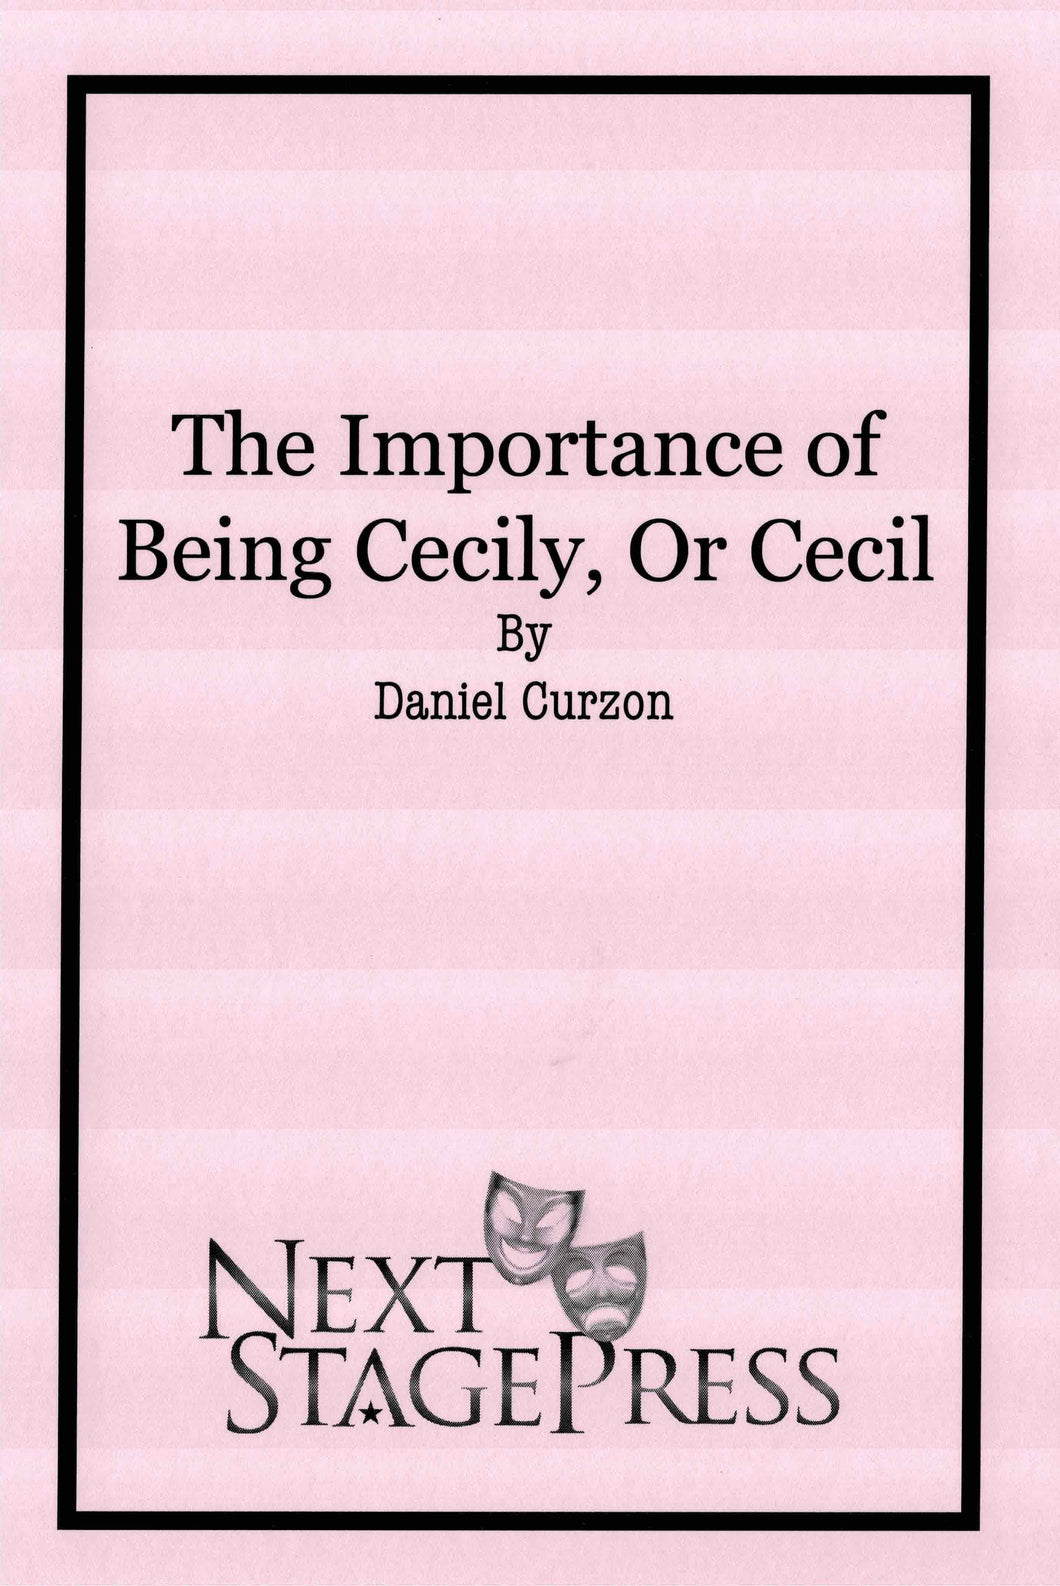 The Importance of Being Cecily, or Cecil - Digital Version